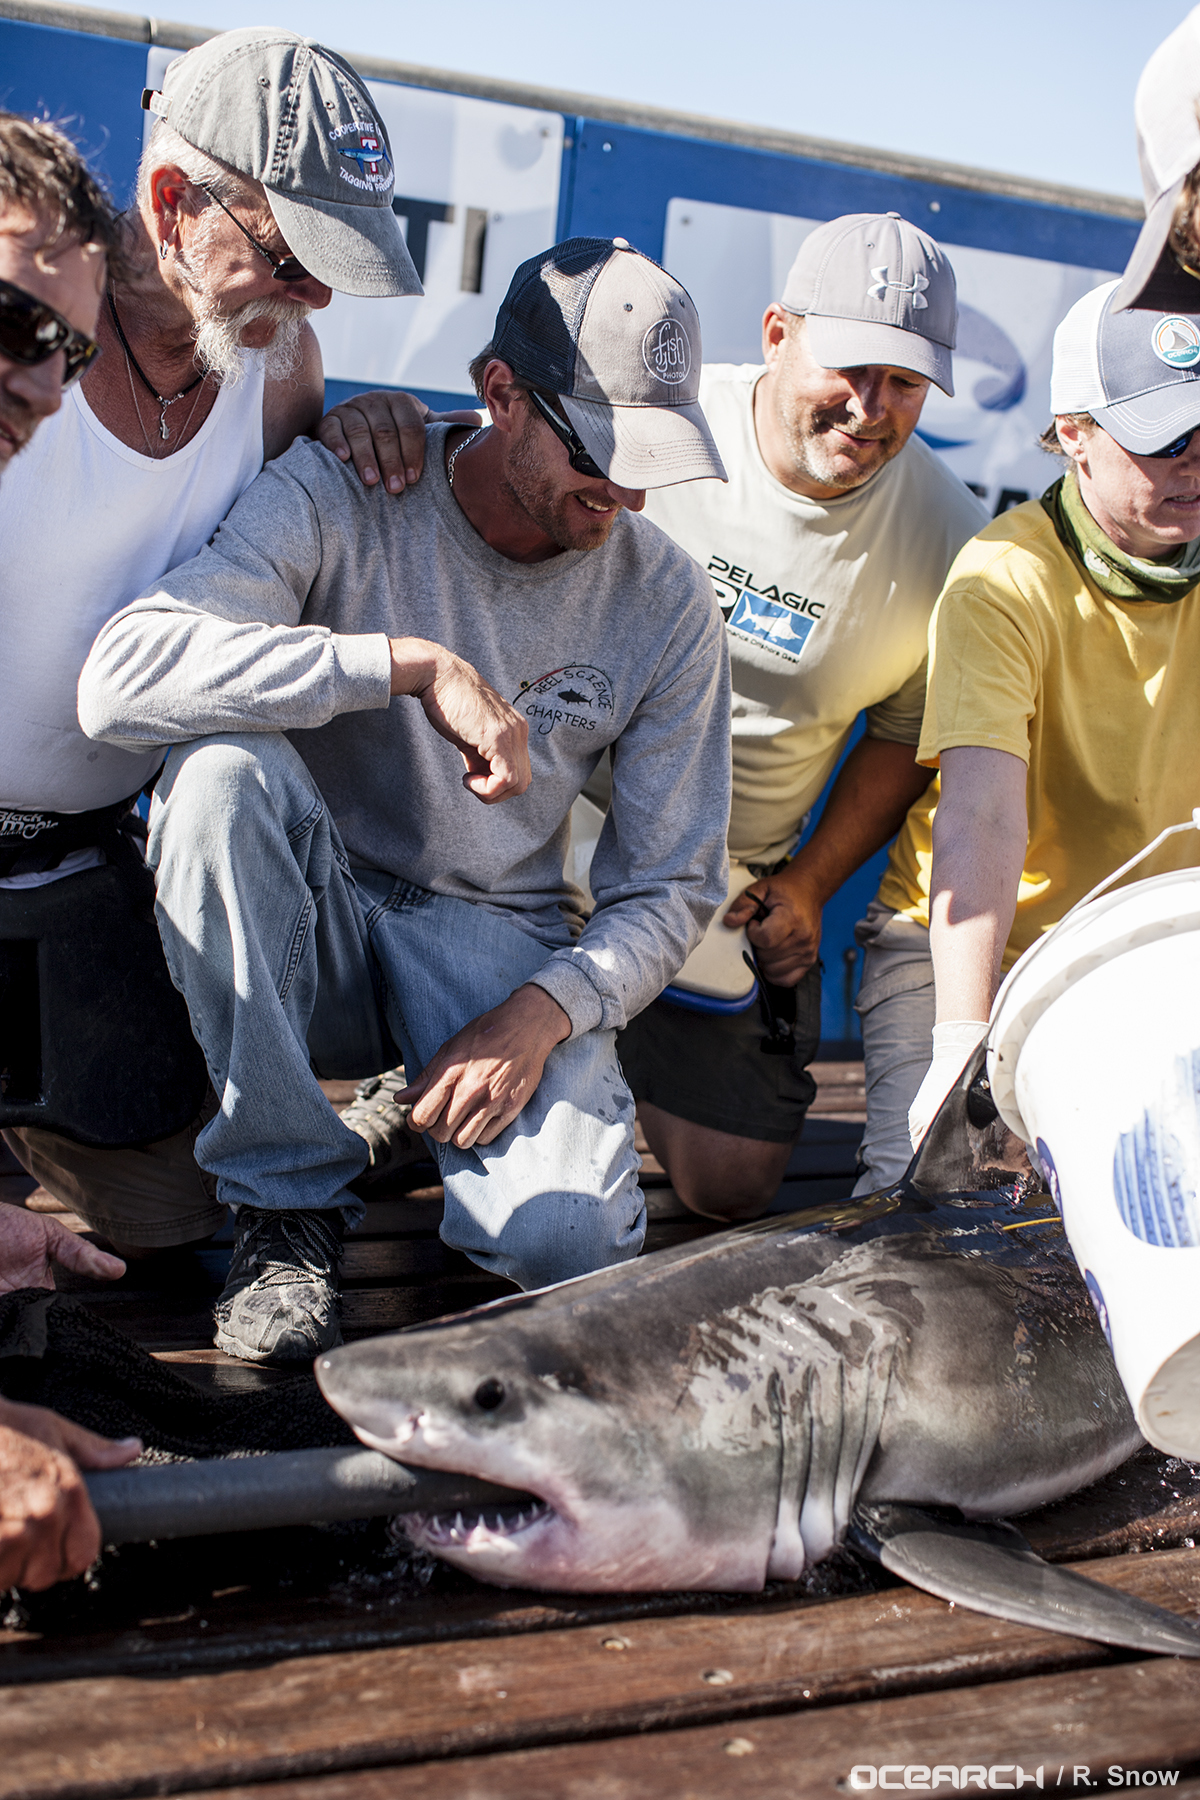 Greg Metzger working with Ocearch